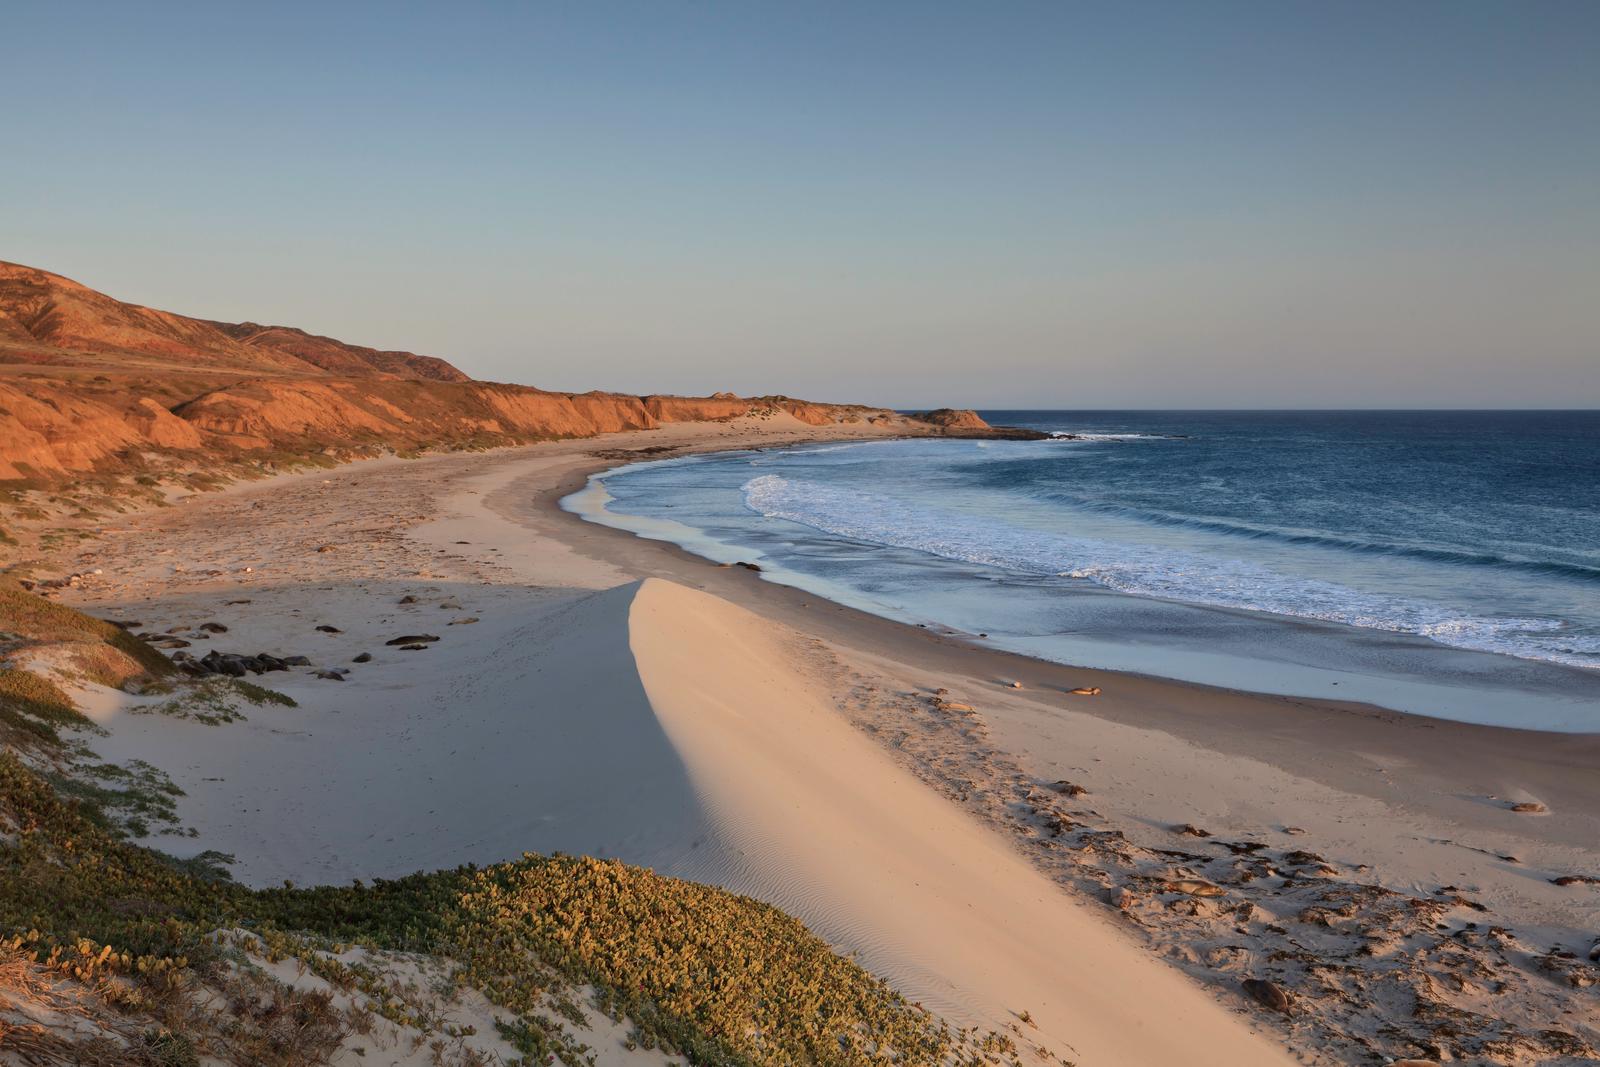 Sandy beach with dunes, ocean and small waves with coastal bluffs covered in grass.  